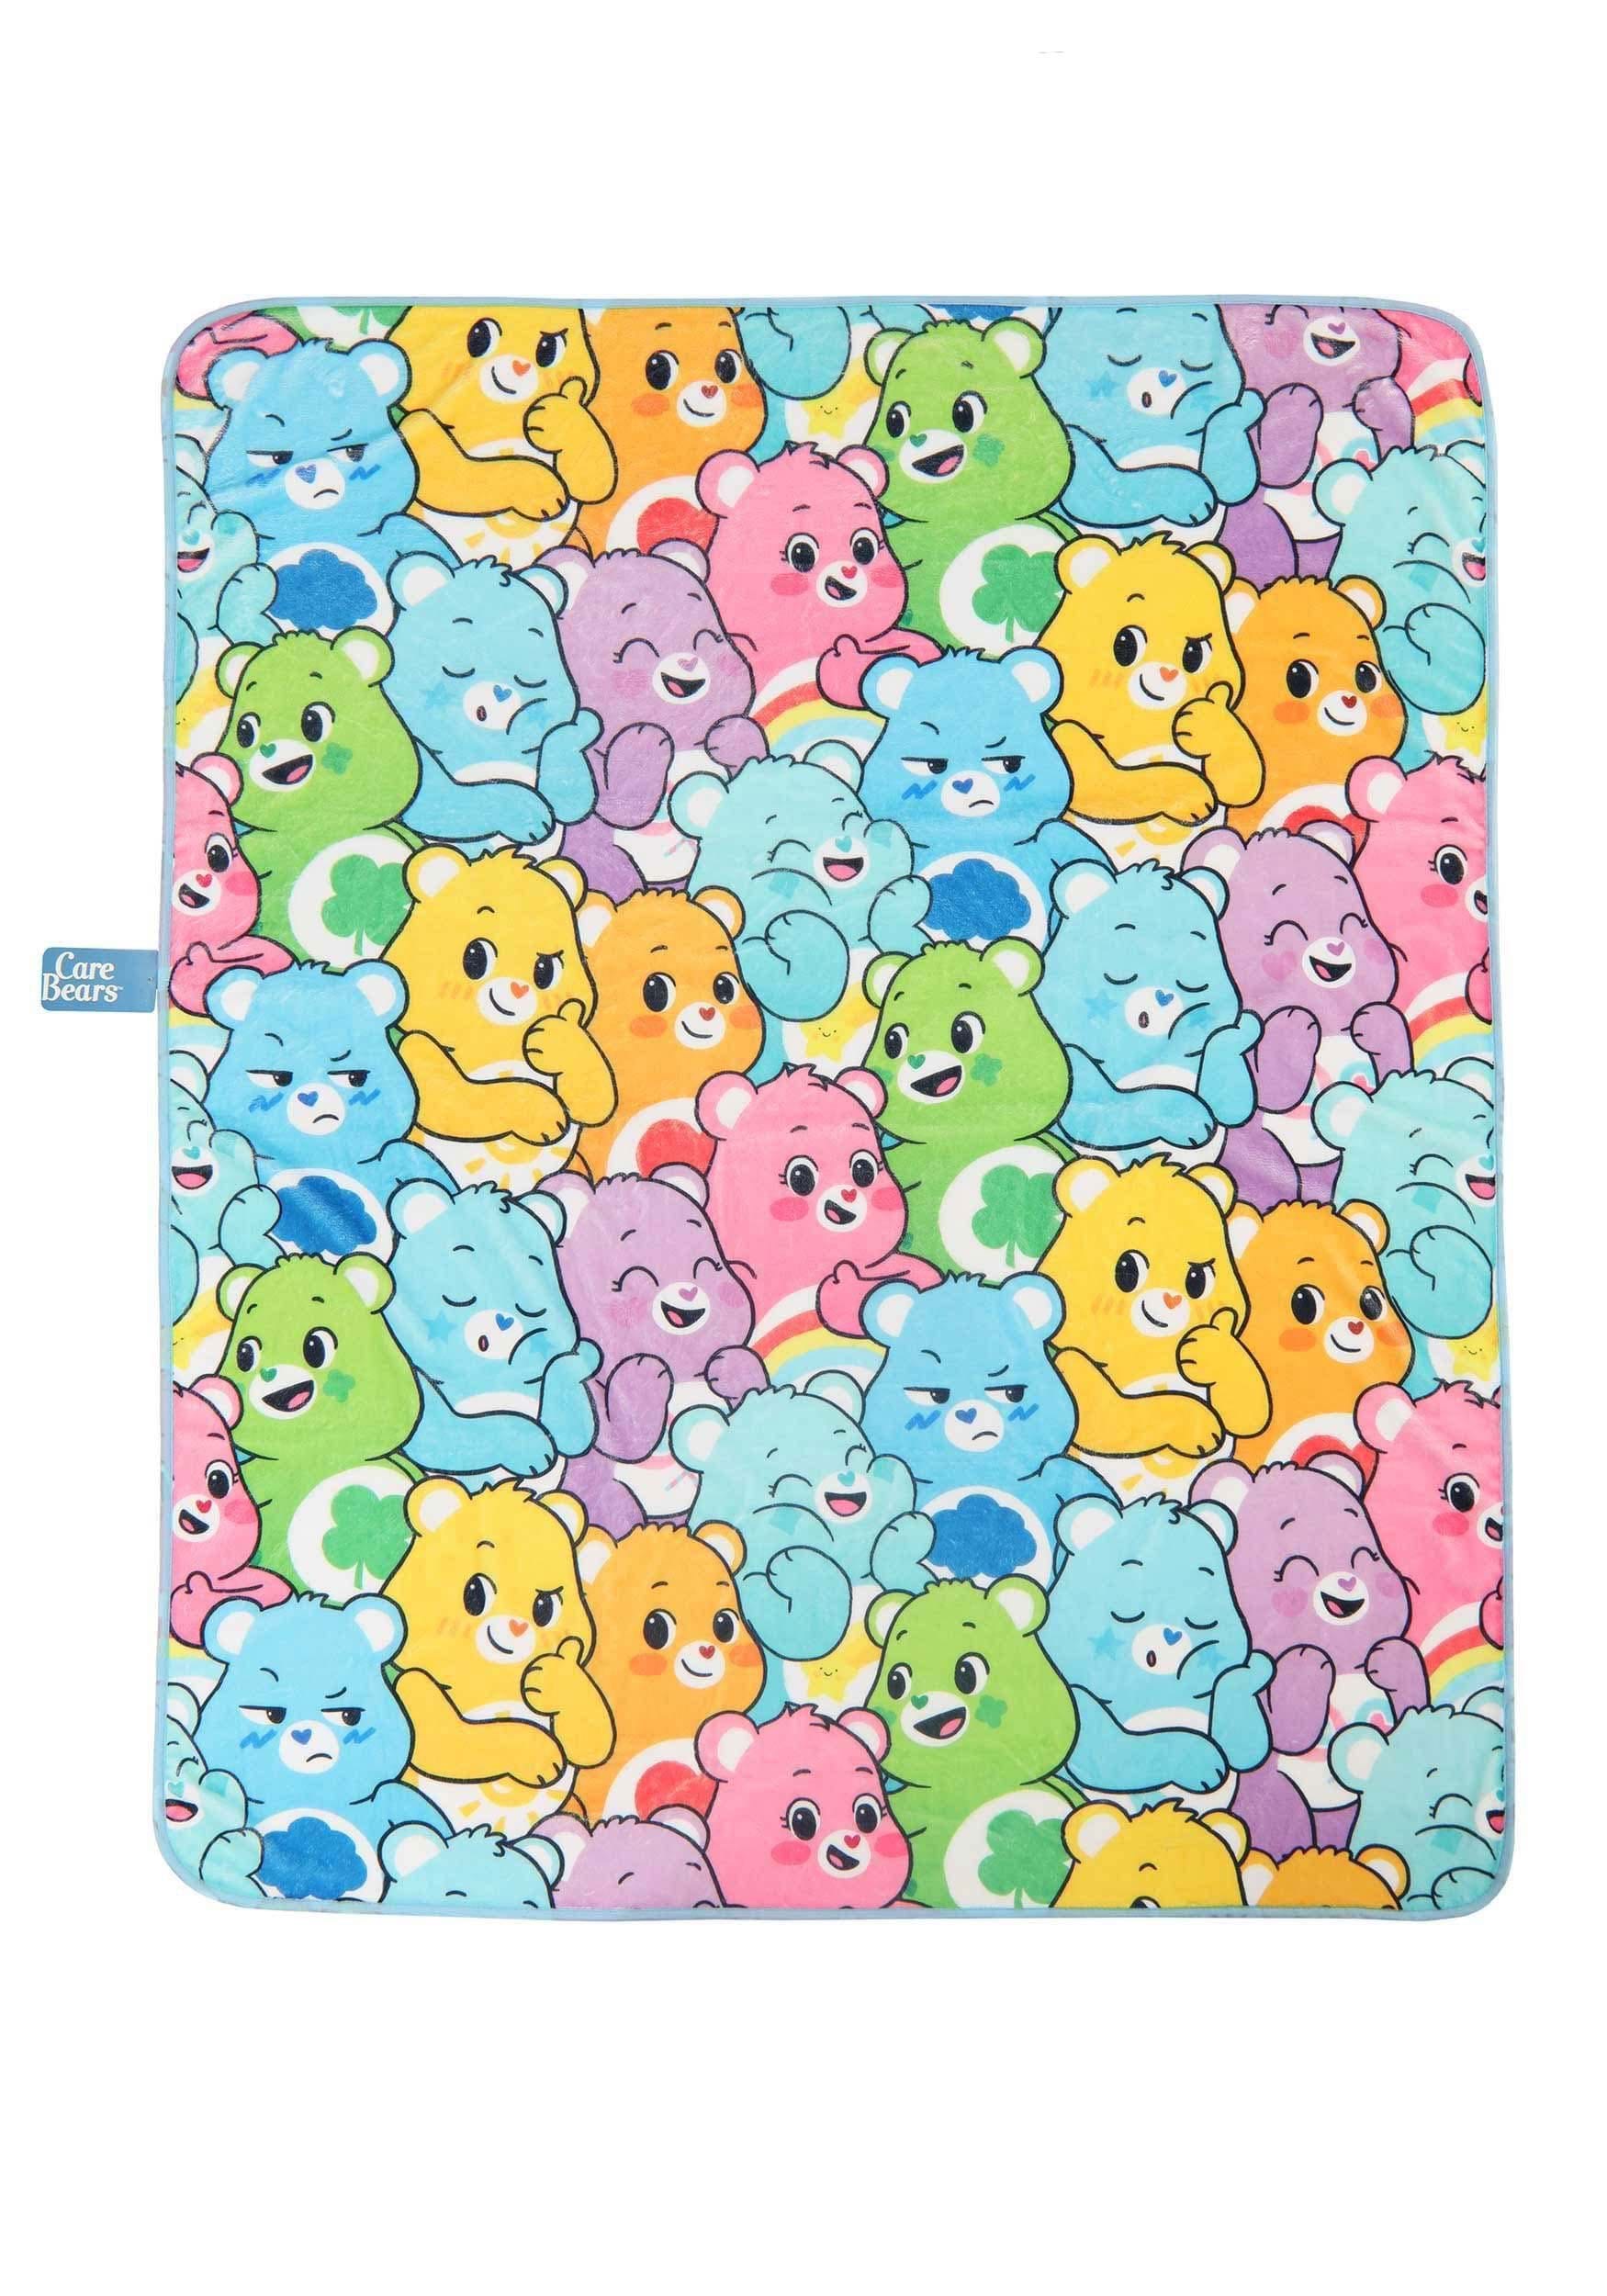 Care Bears Characters Comfy Throw